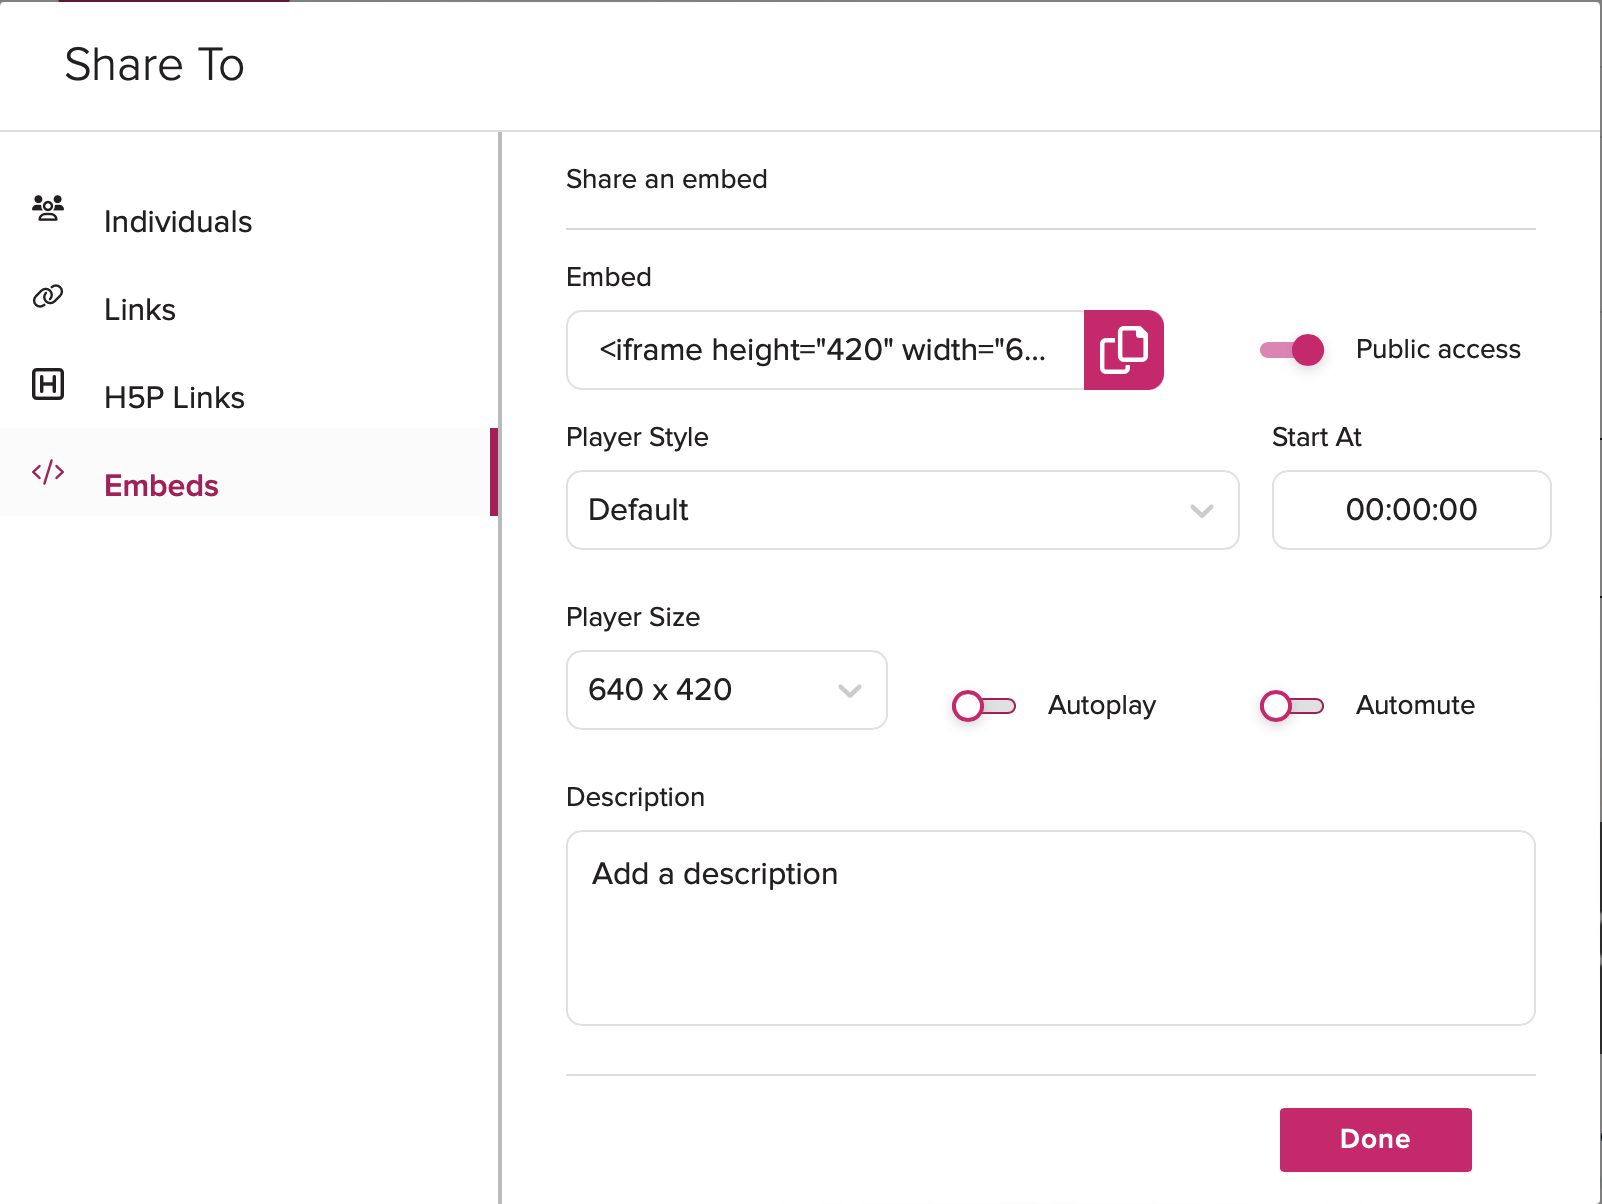 Share Modal with the Embes tab shown and a newly generated embed with all of the configurable options as described